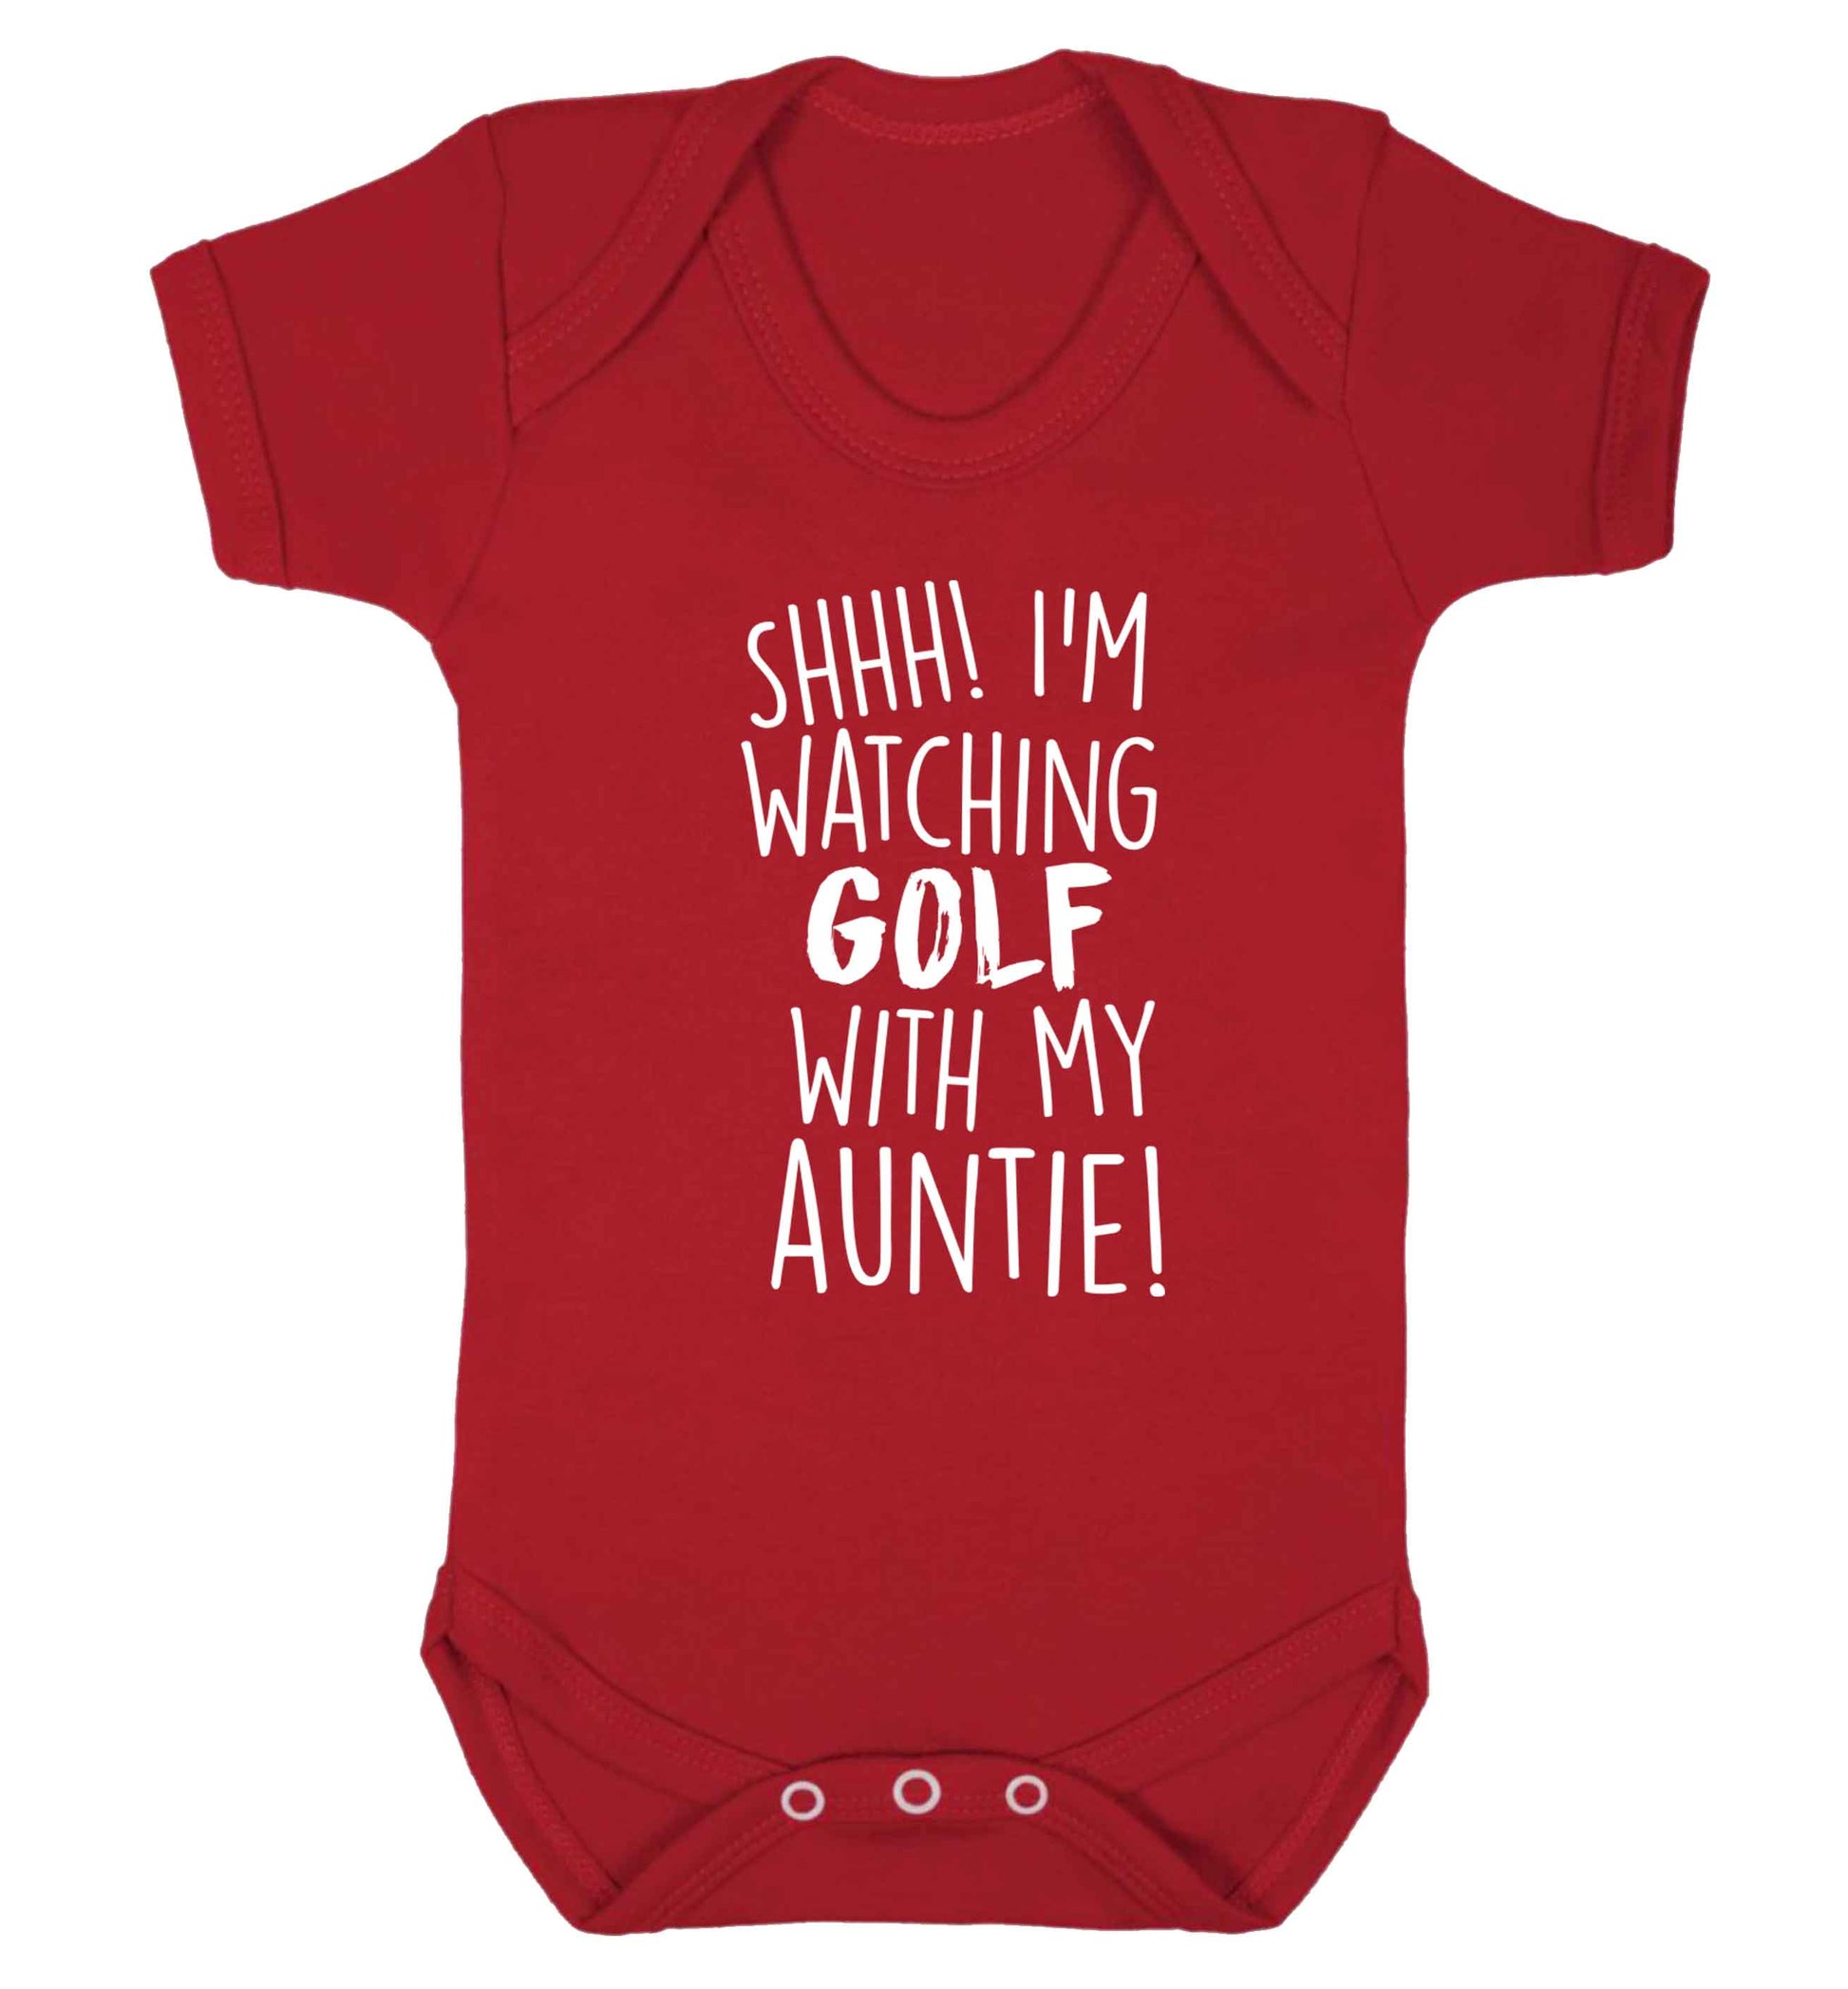 Shh I'm watching golf with my auntie Baby Vest red 18-24 months